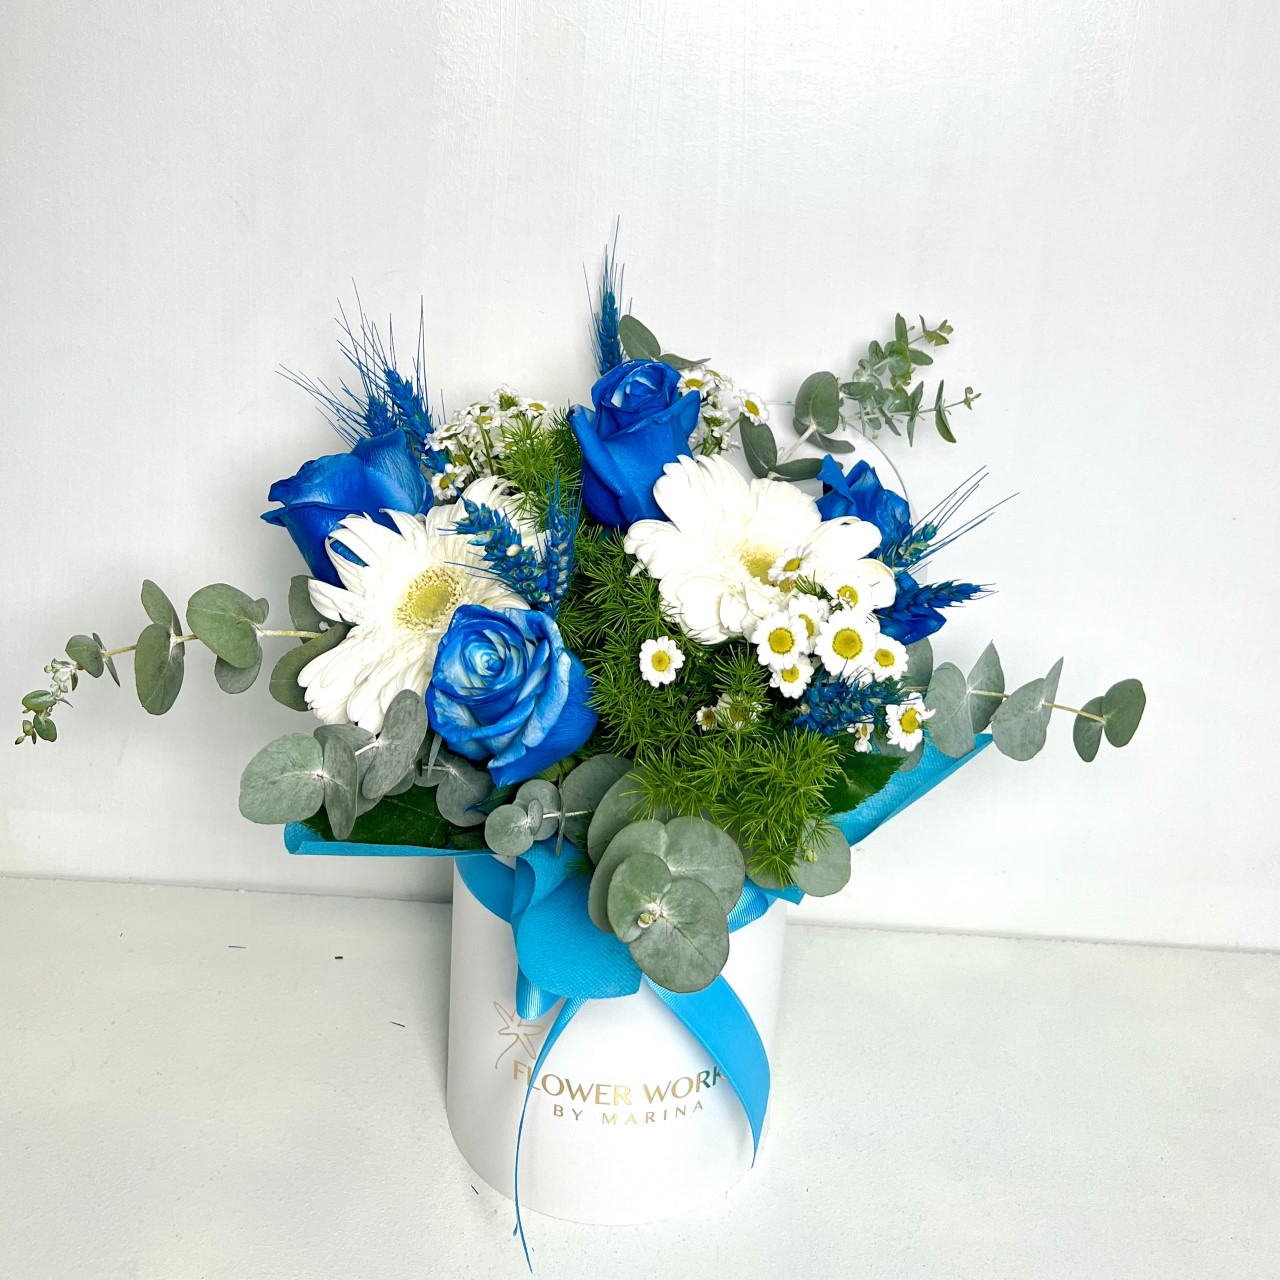 BLUE AND WHITE COMPINATION OF FLOWERS ROSES ZERPERA CHRYSANTHEMUM IN A BOX